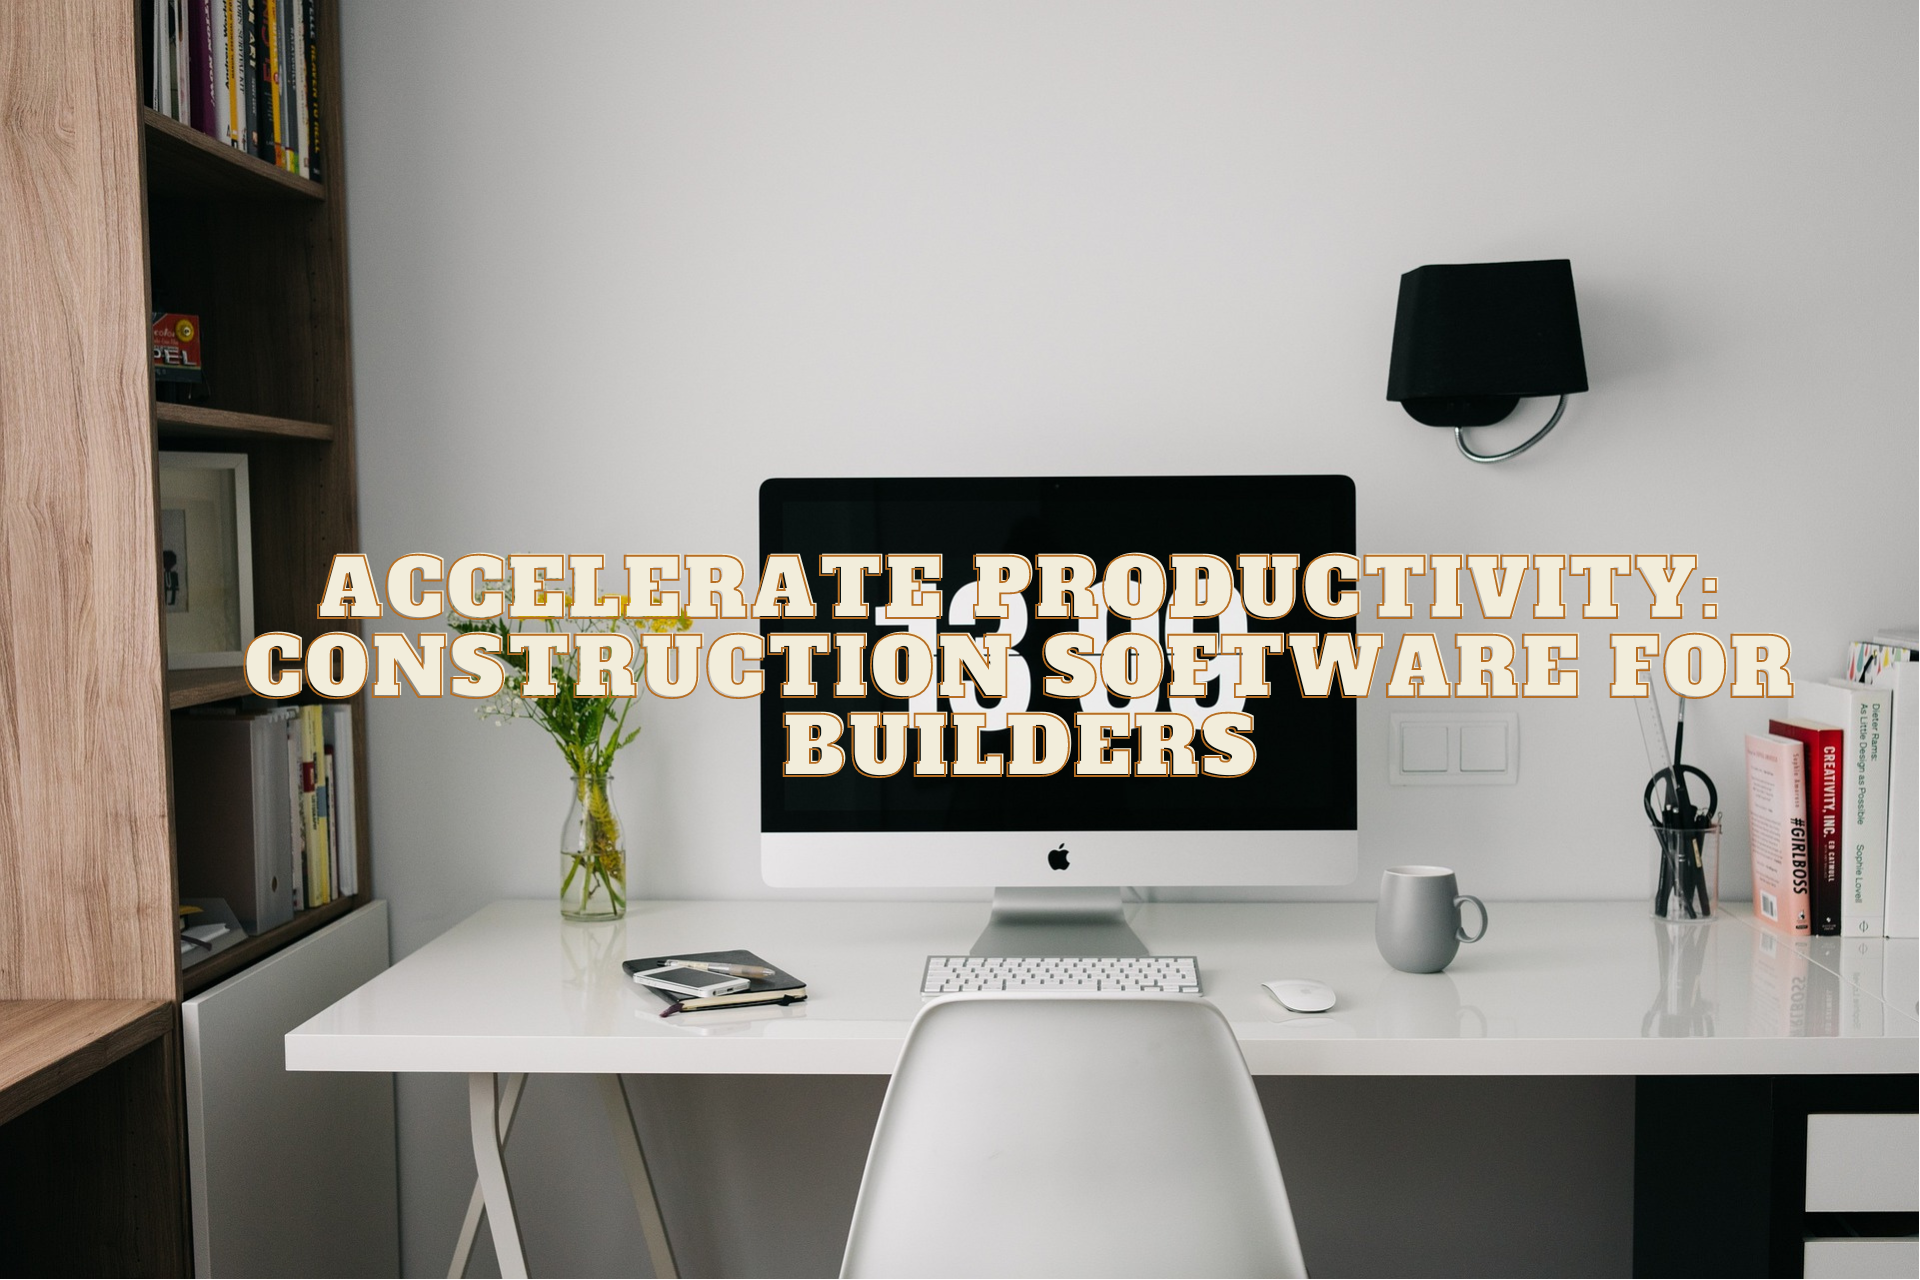 Accelerate Productivity Construction Software for Builders